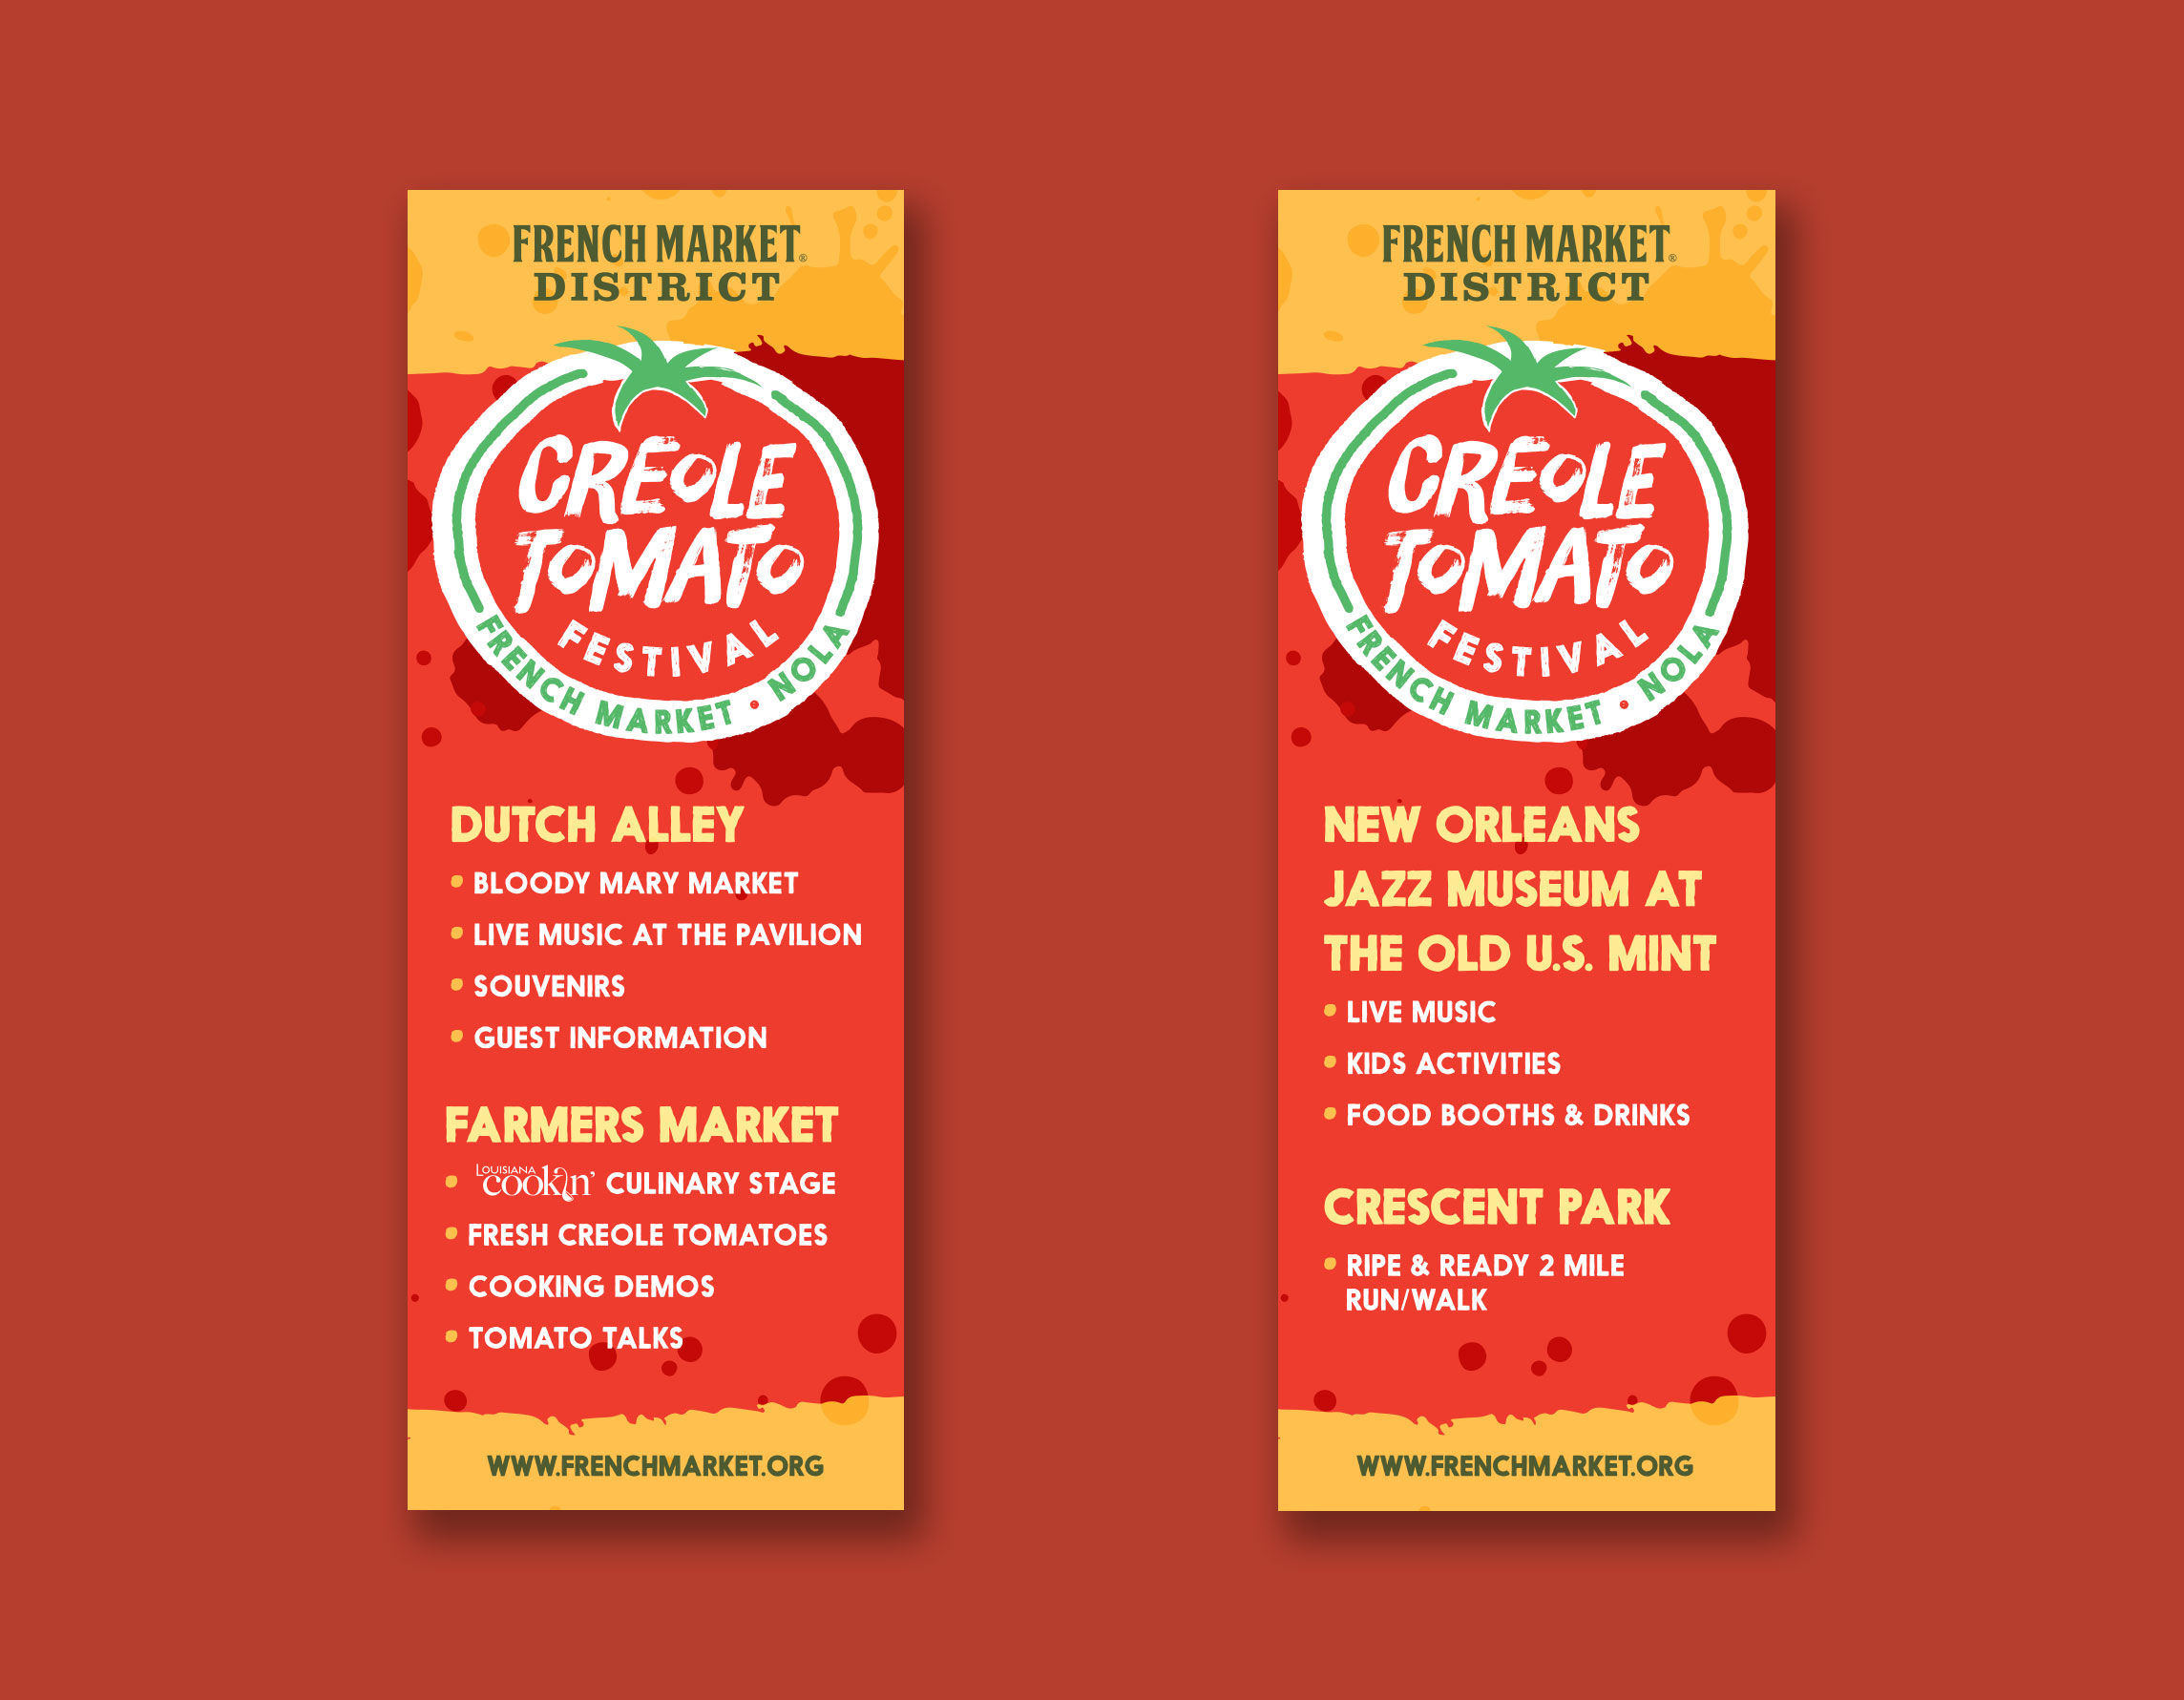 Creole Tomato Festival Banners